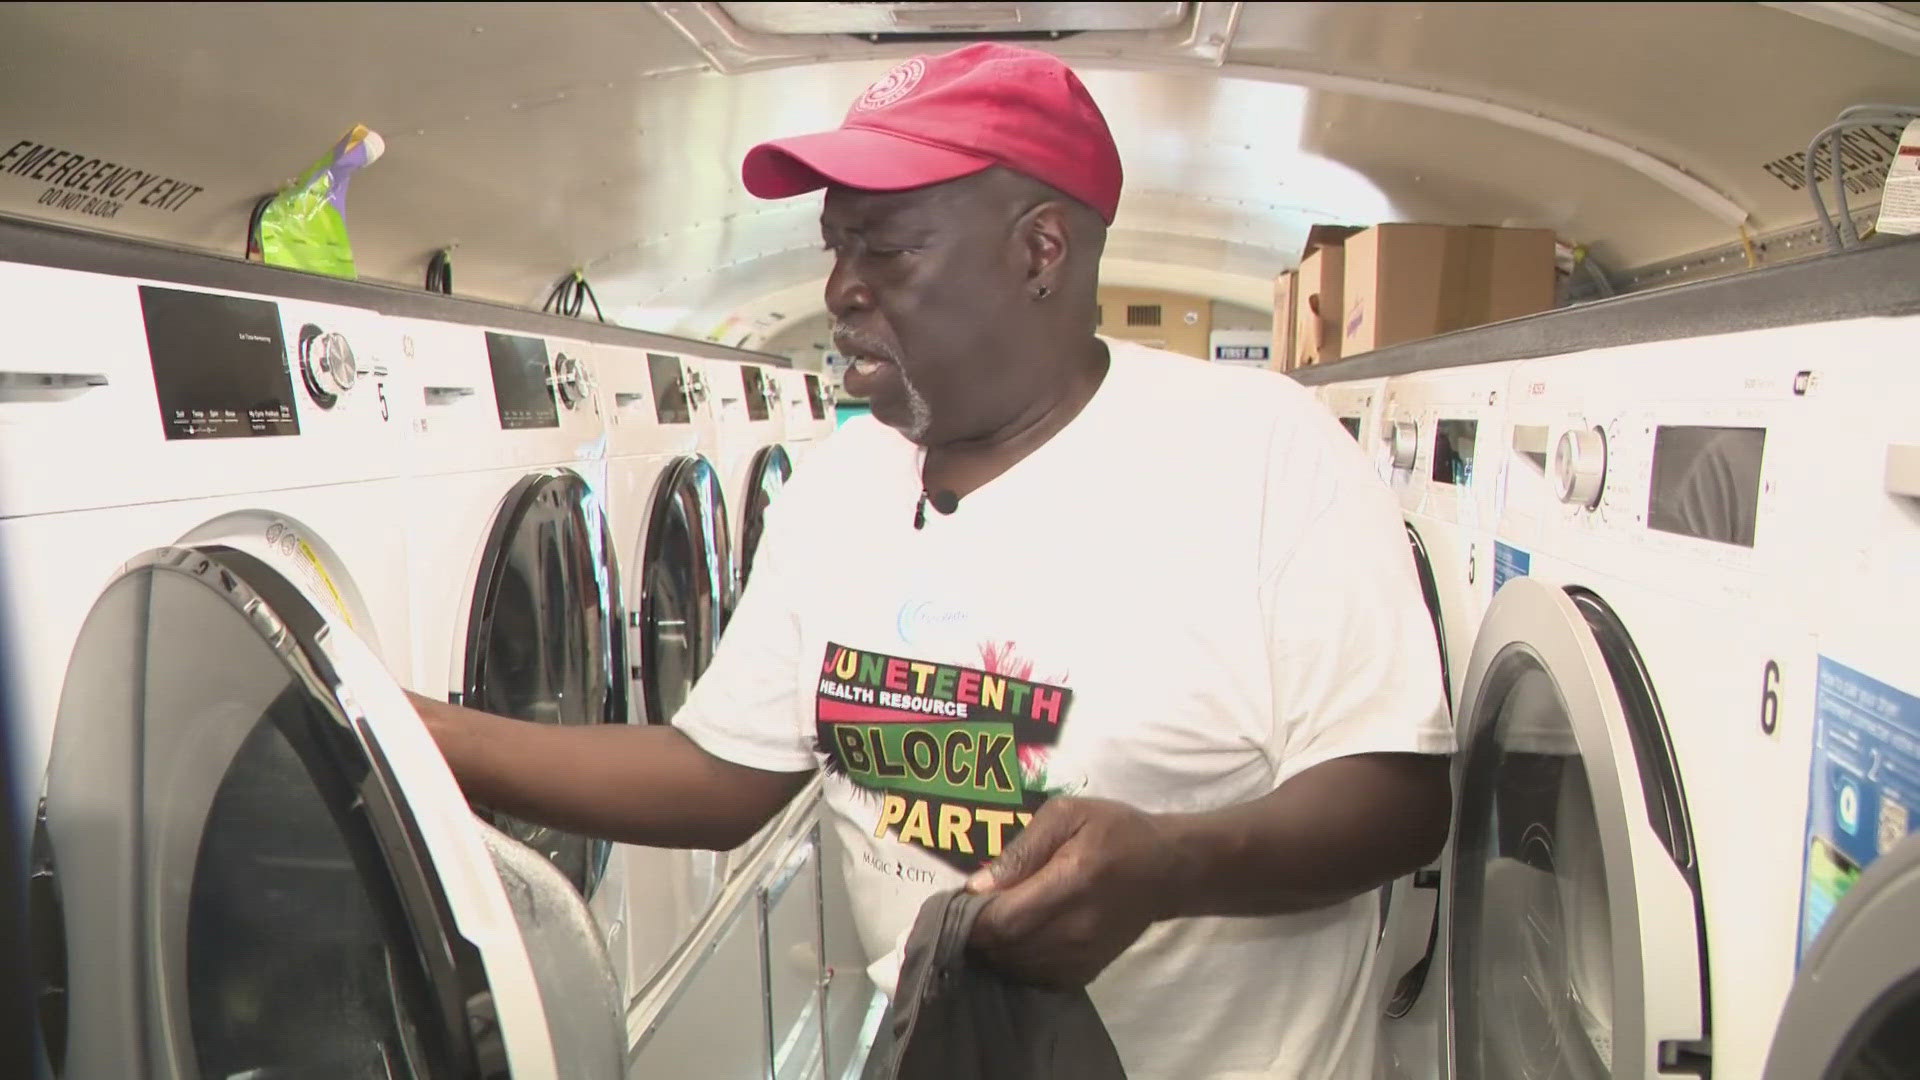 A retired Atlanta man is using his time and effort to provide unhoused people with access to basic needs like showers, laundry and more.